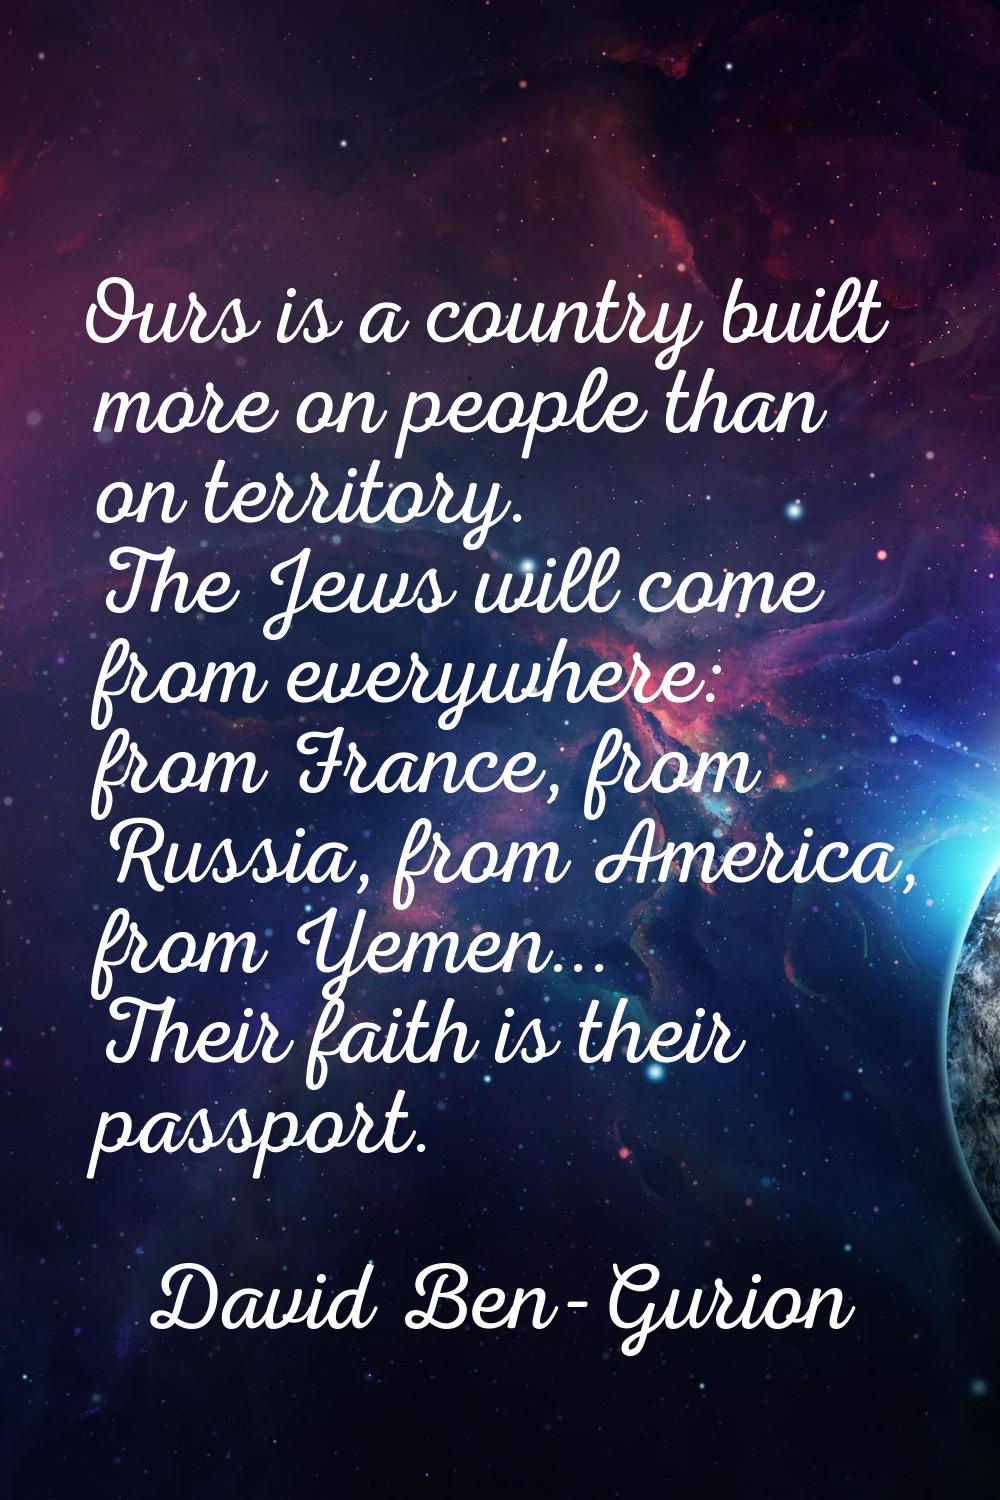 Ours is a country built more on people than on territory. The Jews will come from everywhere: from 